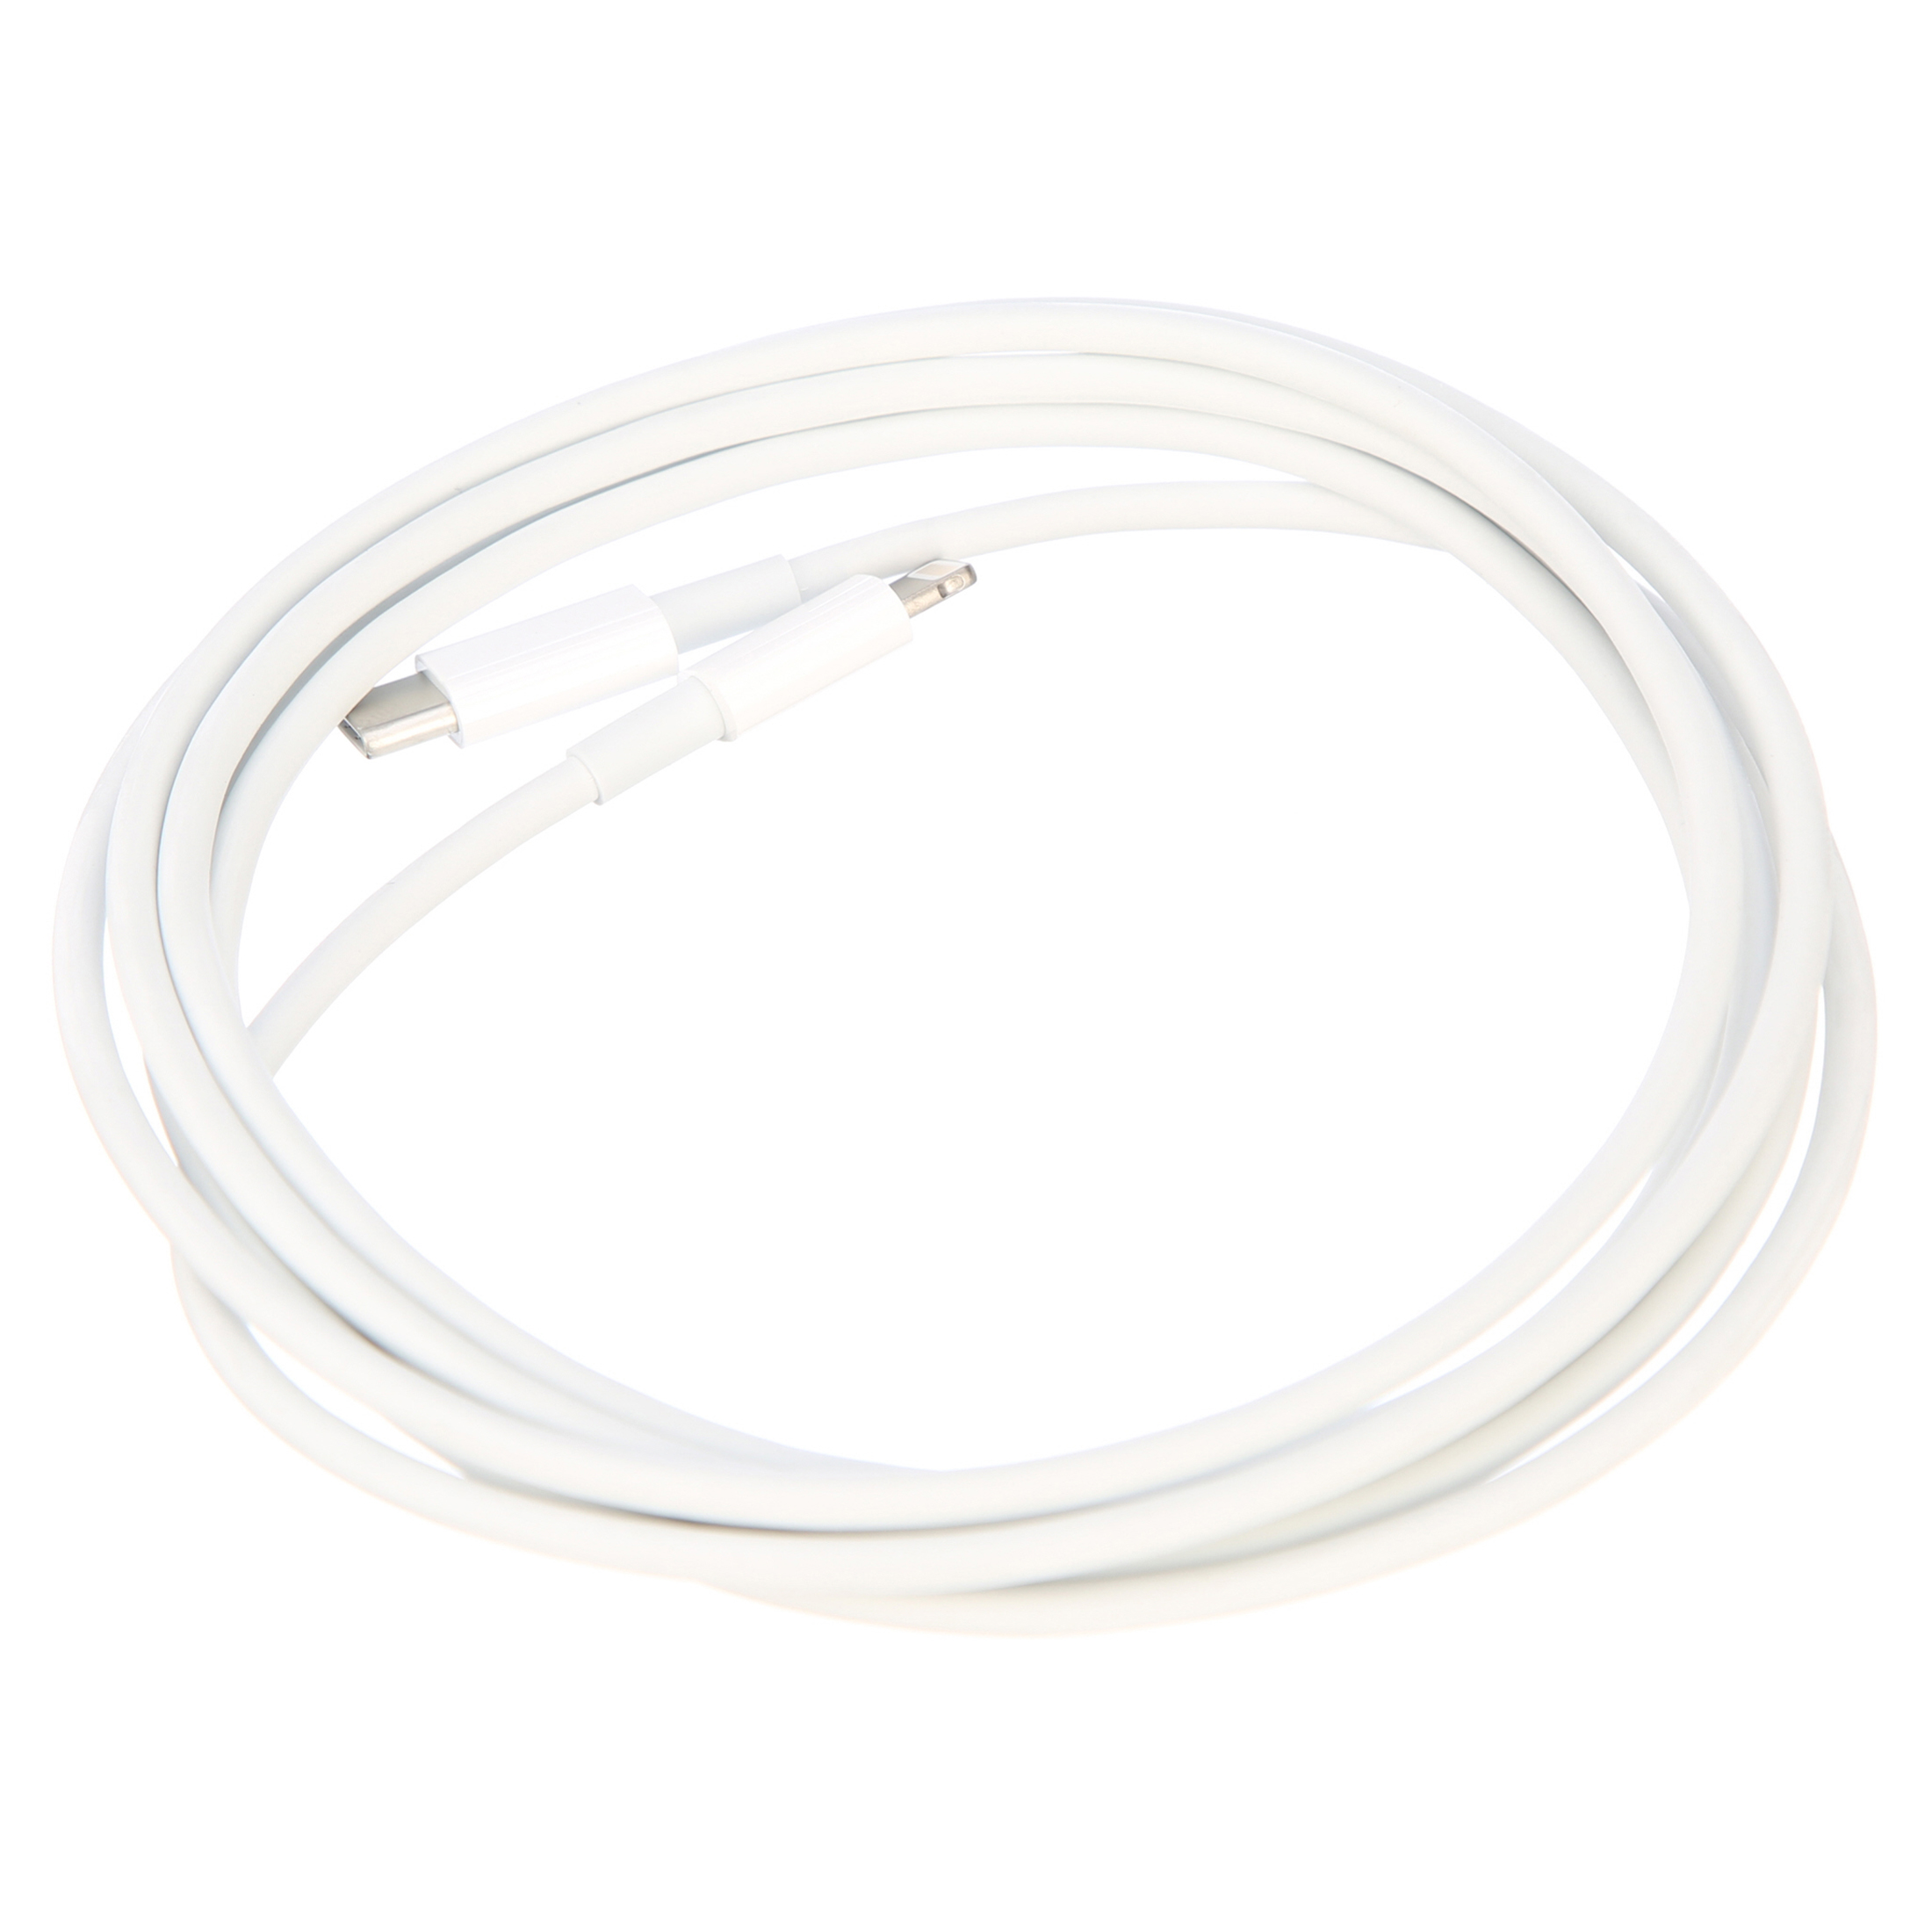 Apple USB-C to Lightning Cable (2 m) - image 5 of 9